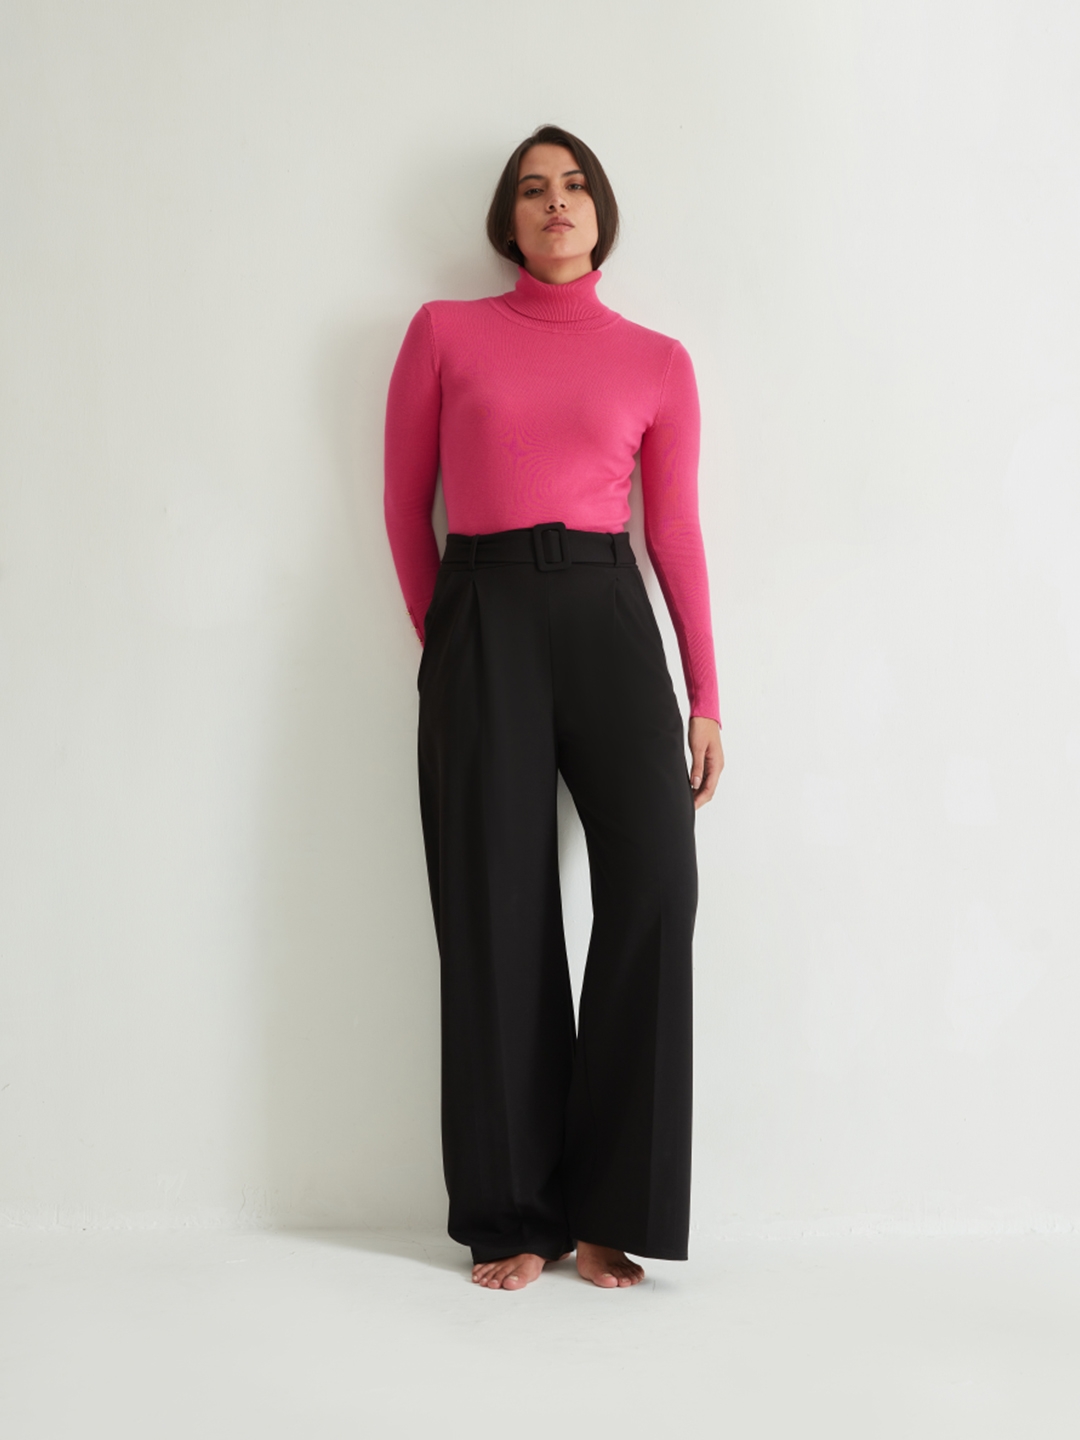 Relaxed Tailored Trouser - Black - Matteau